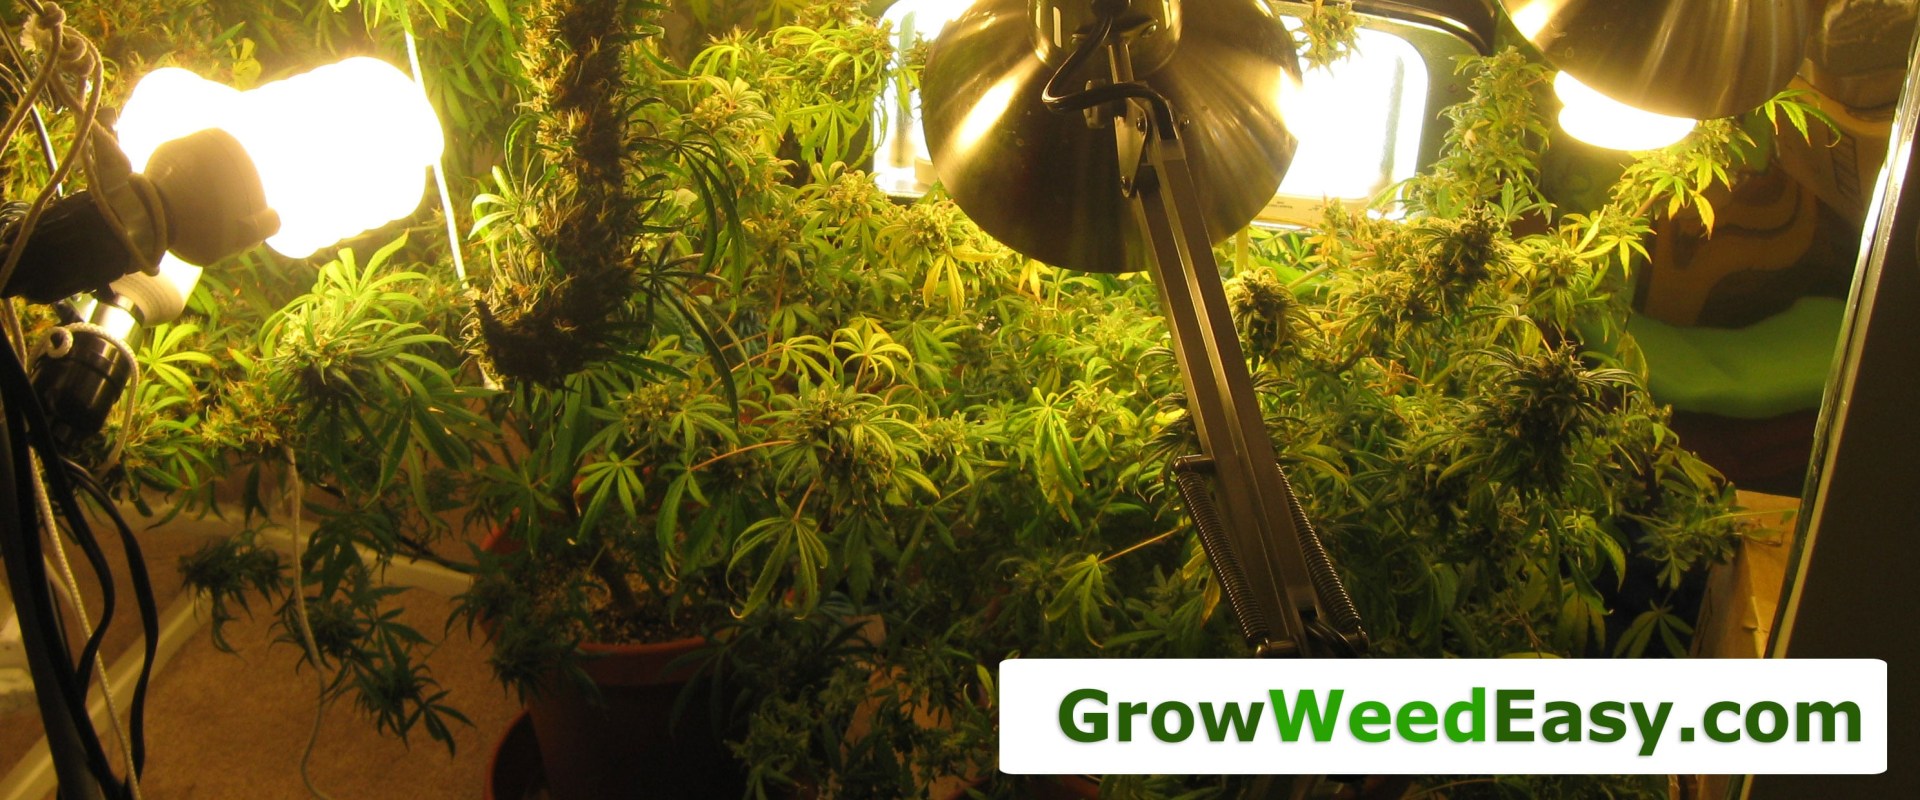 All You Need to Know About High-Pressure Sodium (HPS) Lights for Your Hydroponic Garden